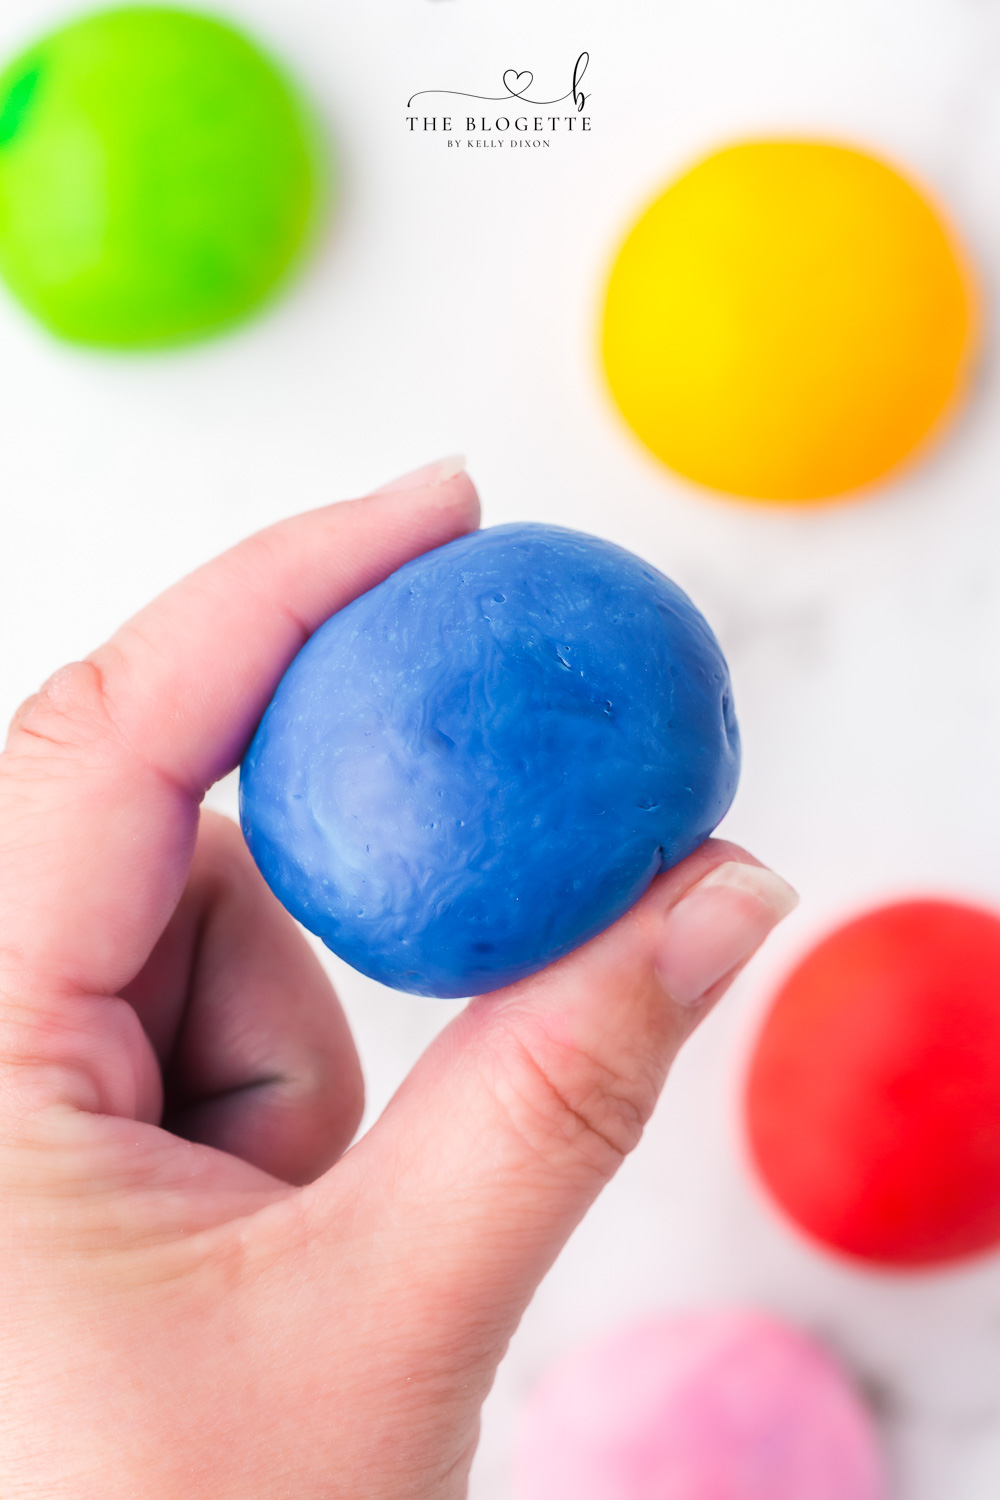 Homemade Bouncy Balls are a great boredom buster and craft for kids! These DIY bouncy balls can also serve as a simple science experiment too!